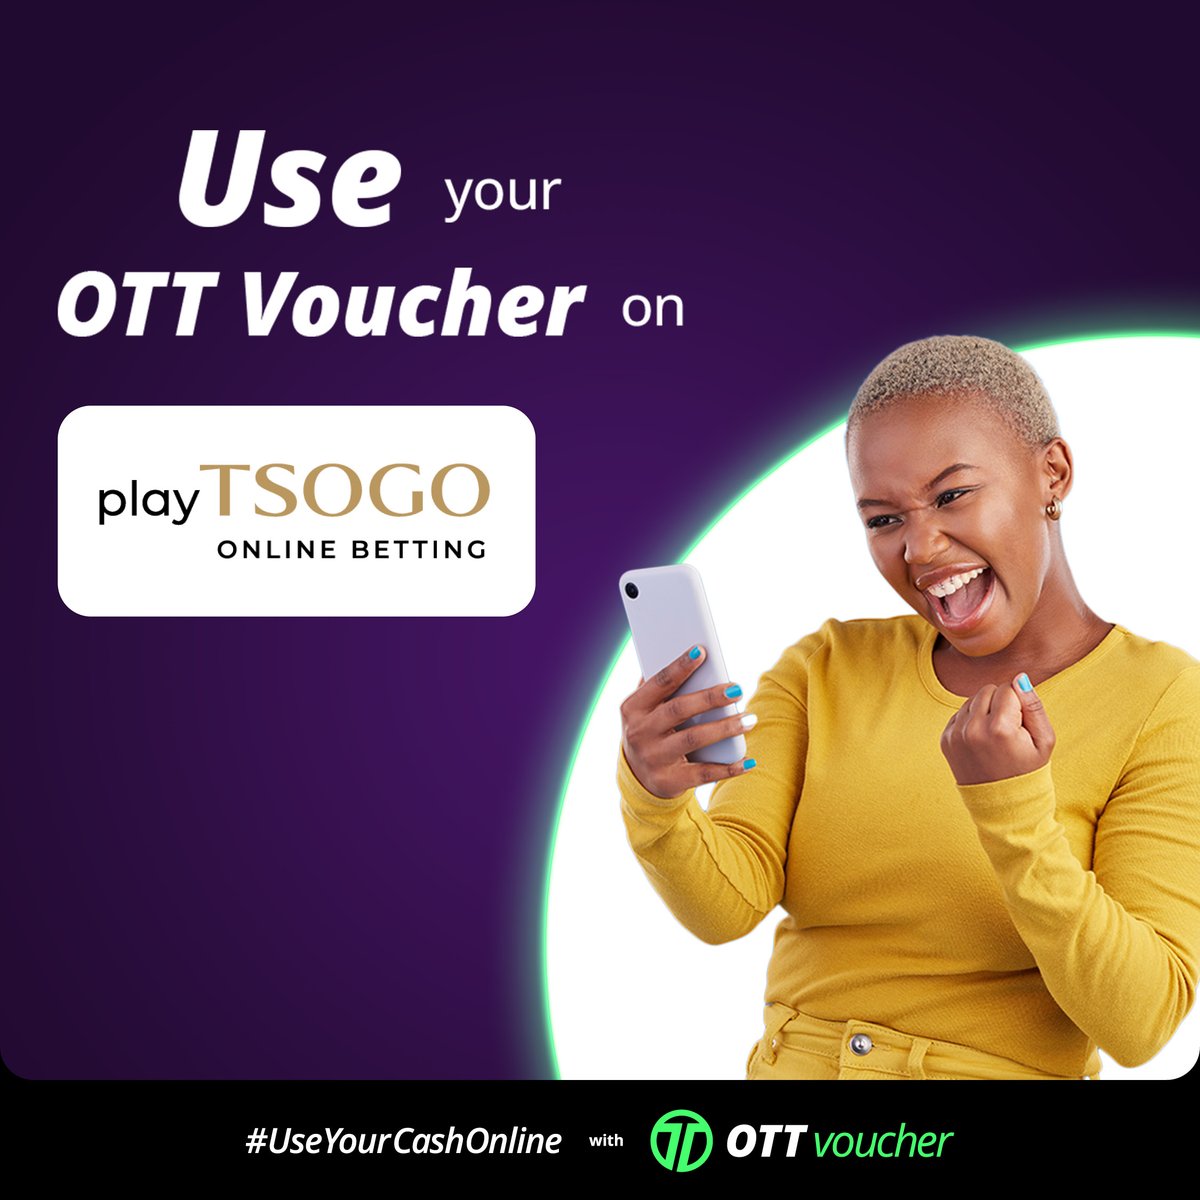 Prepare for an electrifying ride!🚀

Boost your @playTSOGO account with an #OTTVoucher & take your online adventures to new heights!🔥

Are you using us to top up? Tell us in the comments!

Buy #OTTVoucher from 250K+ stores nationwide or your bank app: bit.ly/ottbuy. 💸